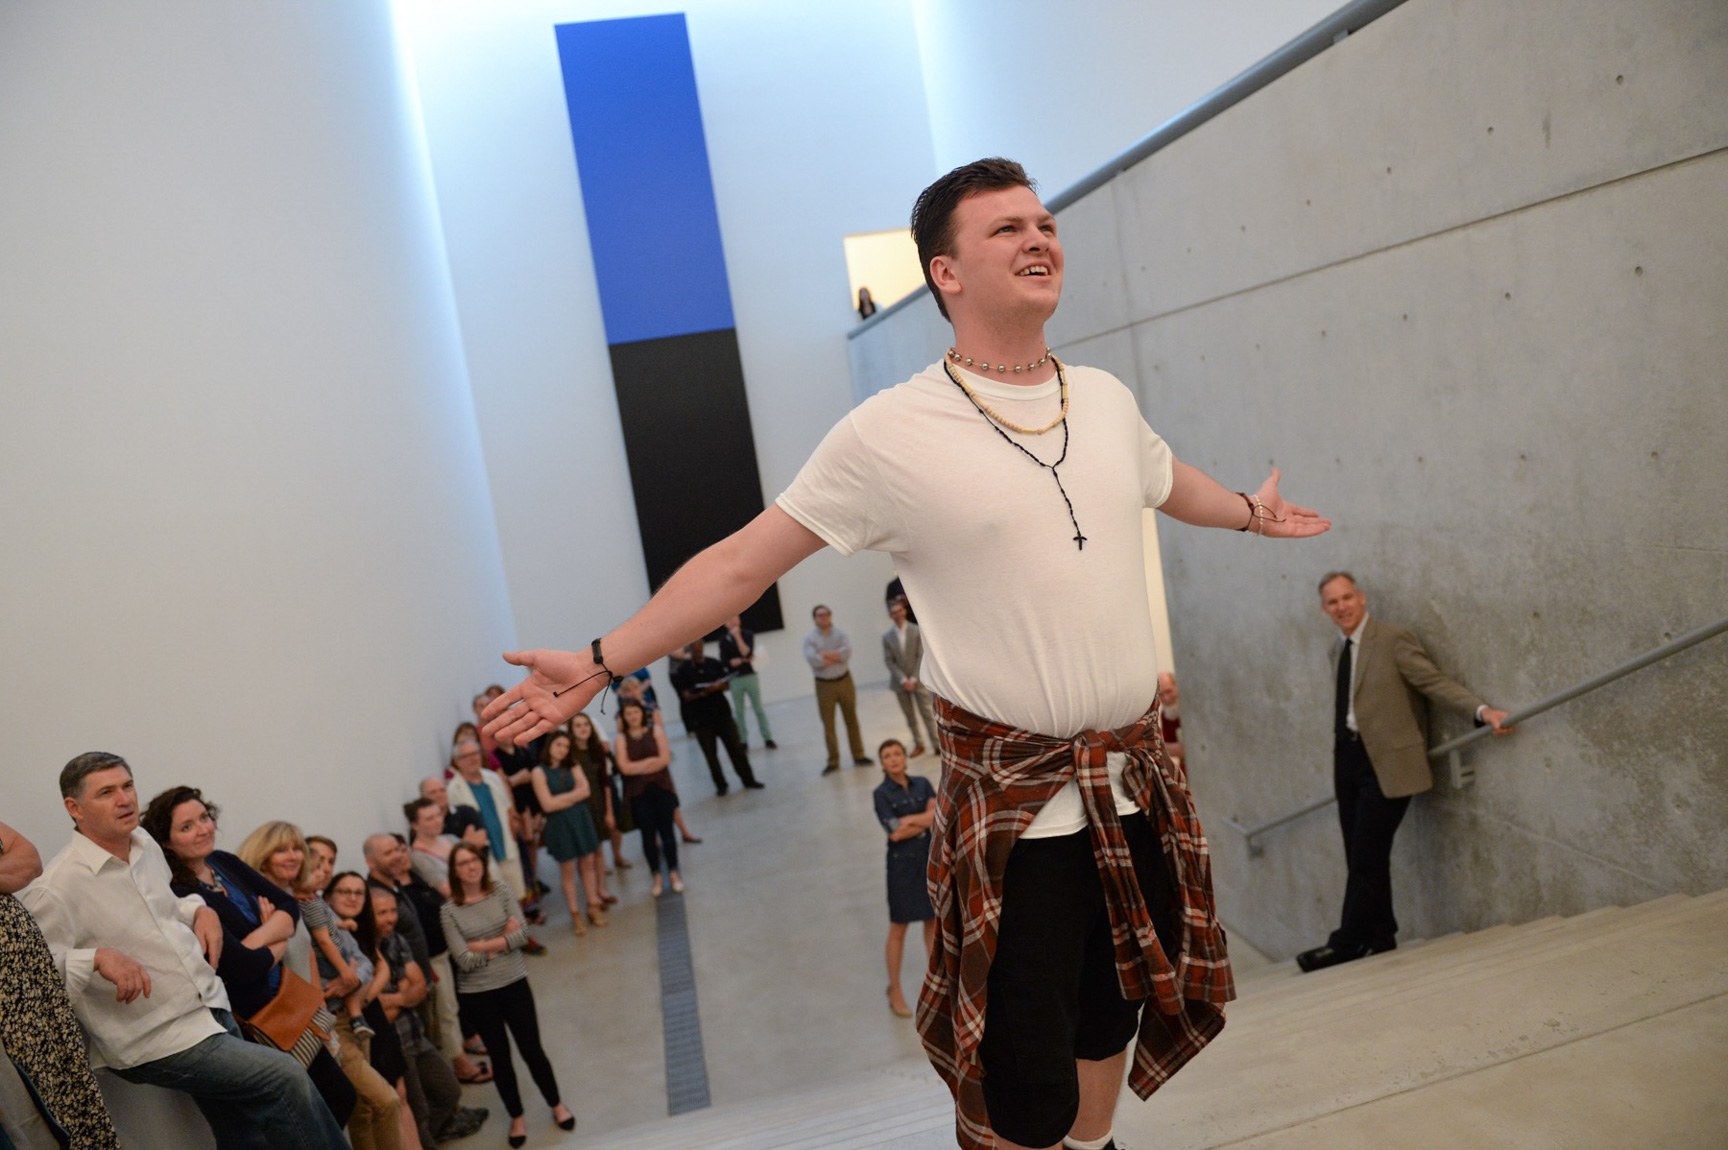 An actor performs with their arms outstretched in front of an audience lining the Main Staircase.